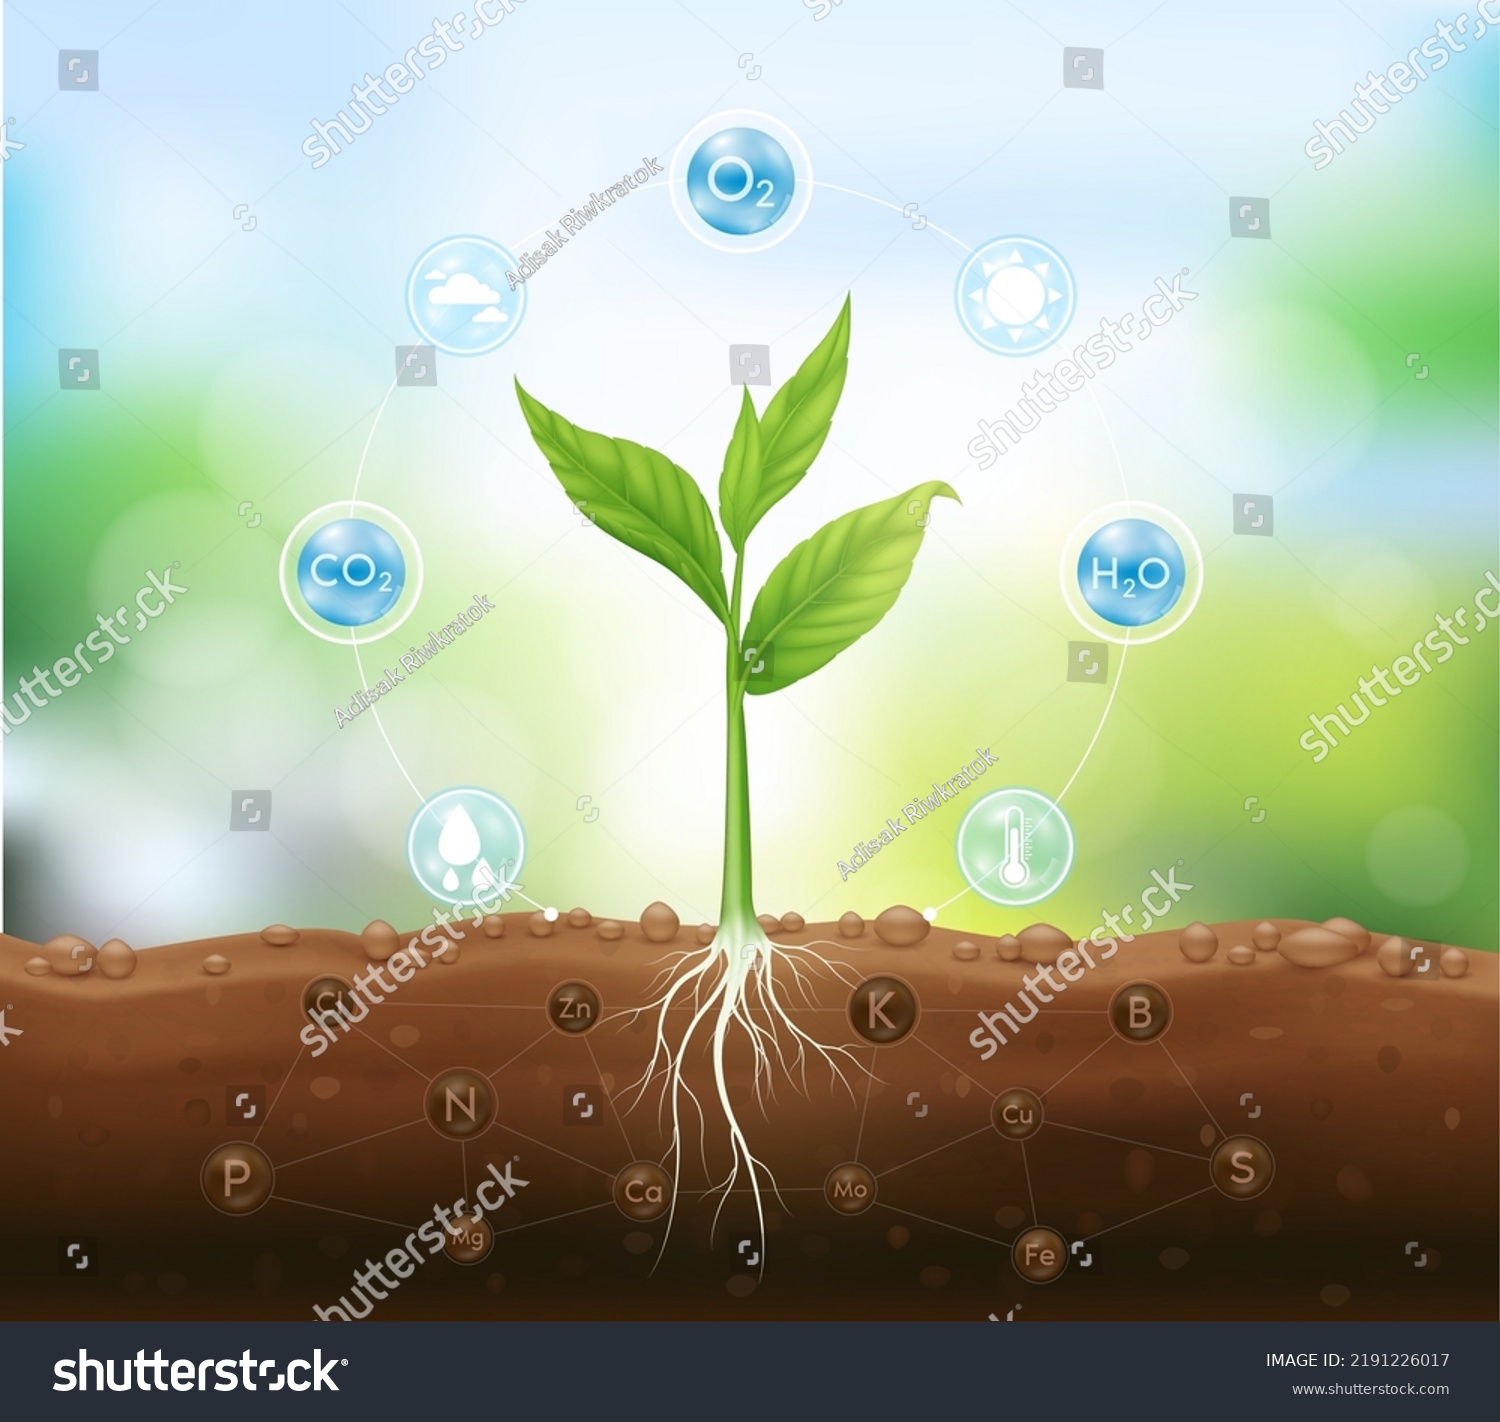 Mineral fertilizer. Seedling growing from fertile ground with underground roots close up and have technology icon about minerals. Agriculture concept. Use ad the agricultural industry. Vector EPS10. #2191226017